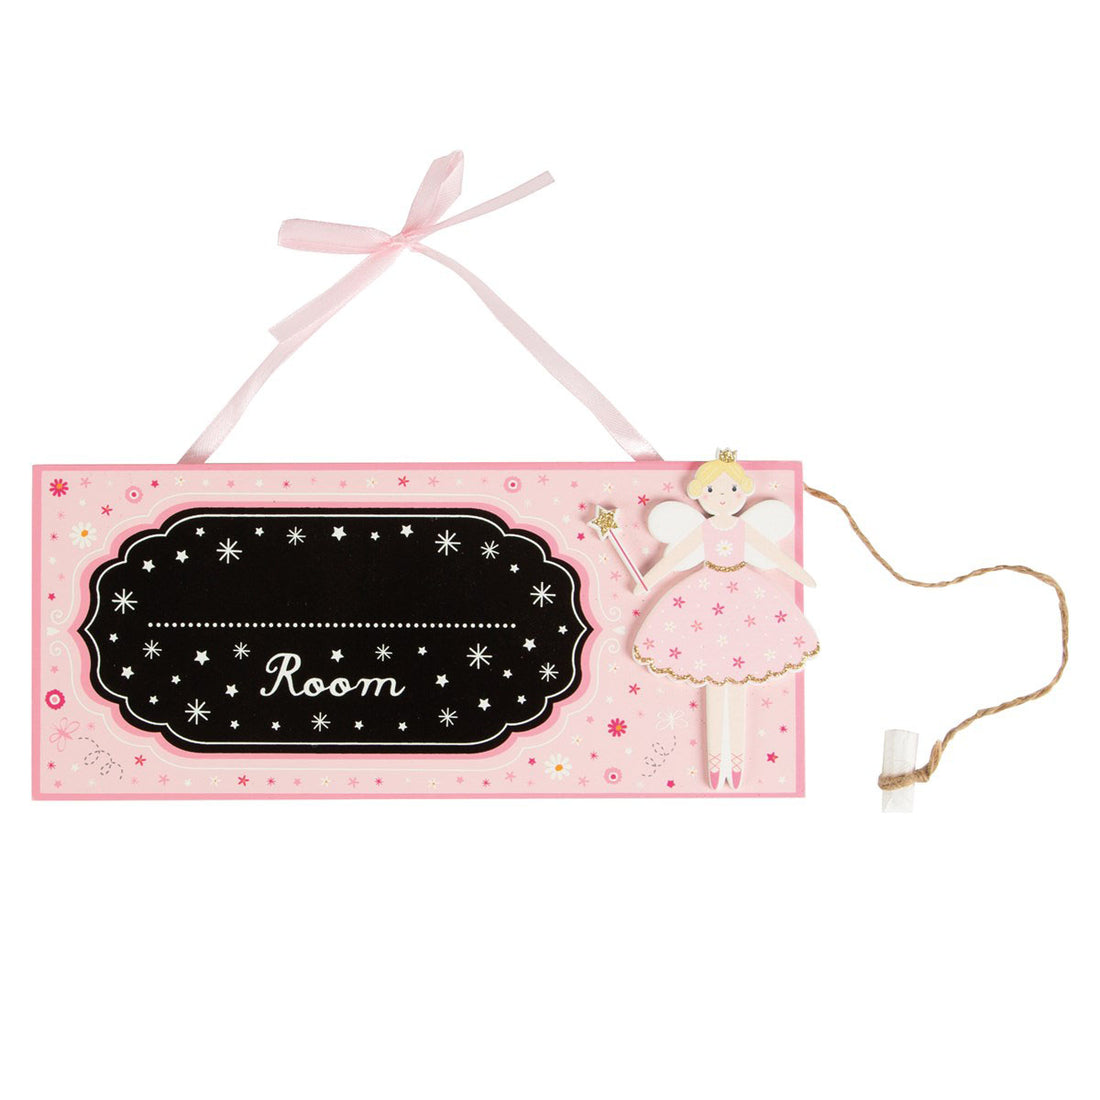 rjb-stone-fairy-wishes-room-chalkboard-hanging-sign-01